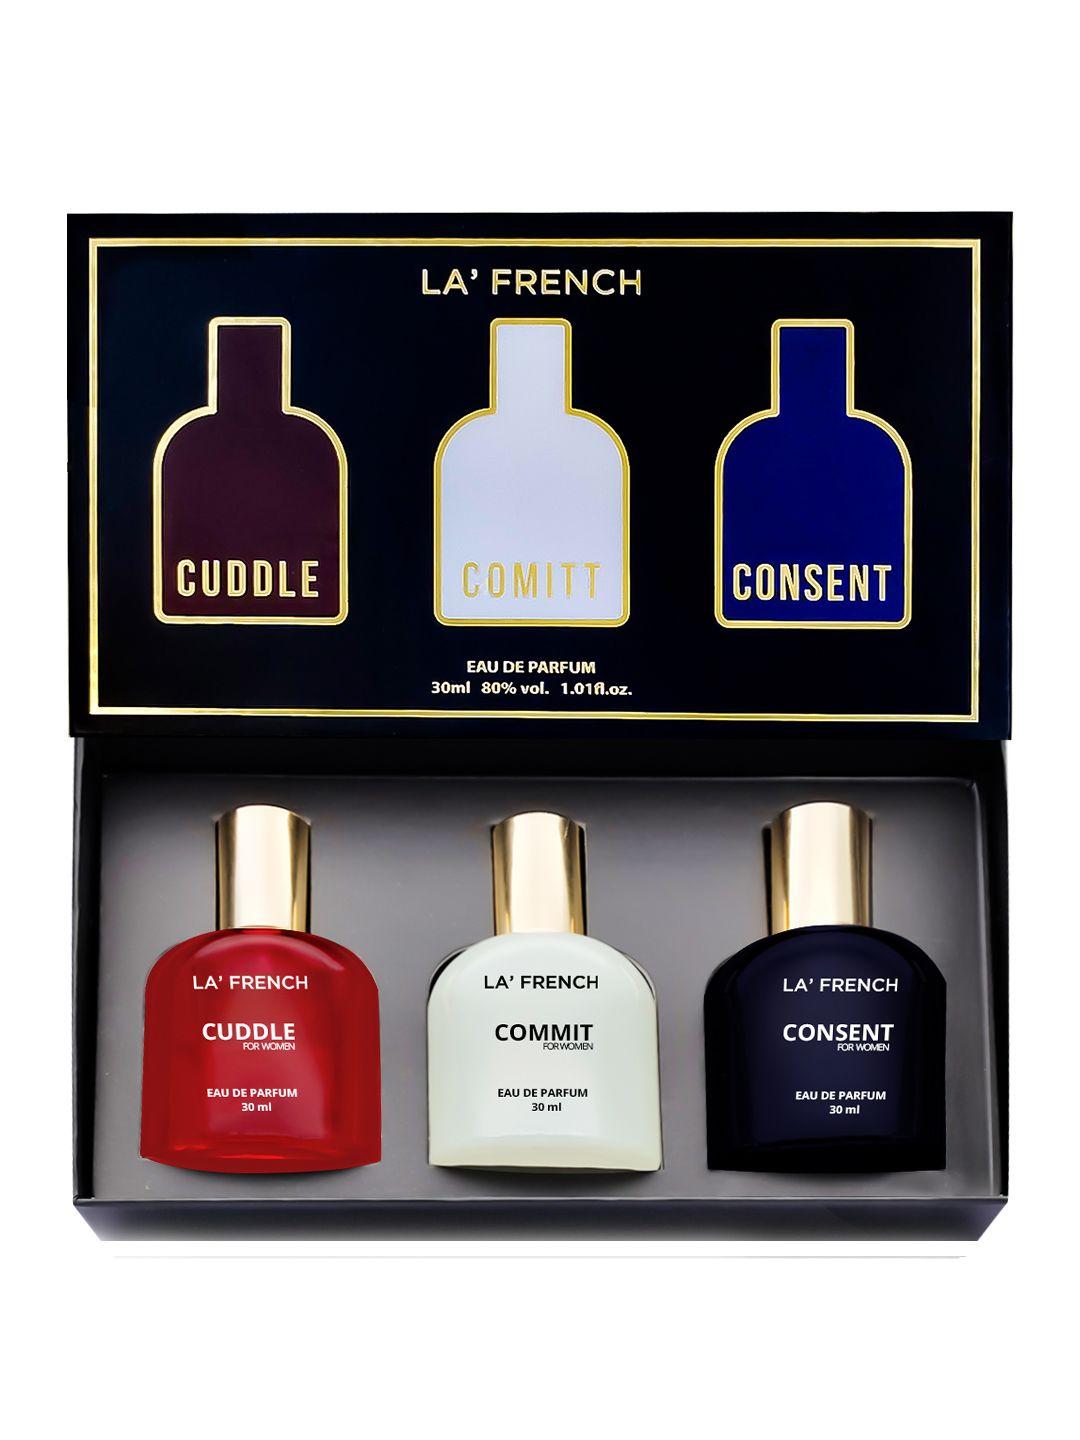 la french c series set of 3 edp perfume - cuddle-commit-consent - 30ml each